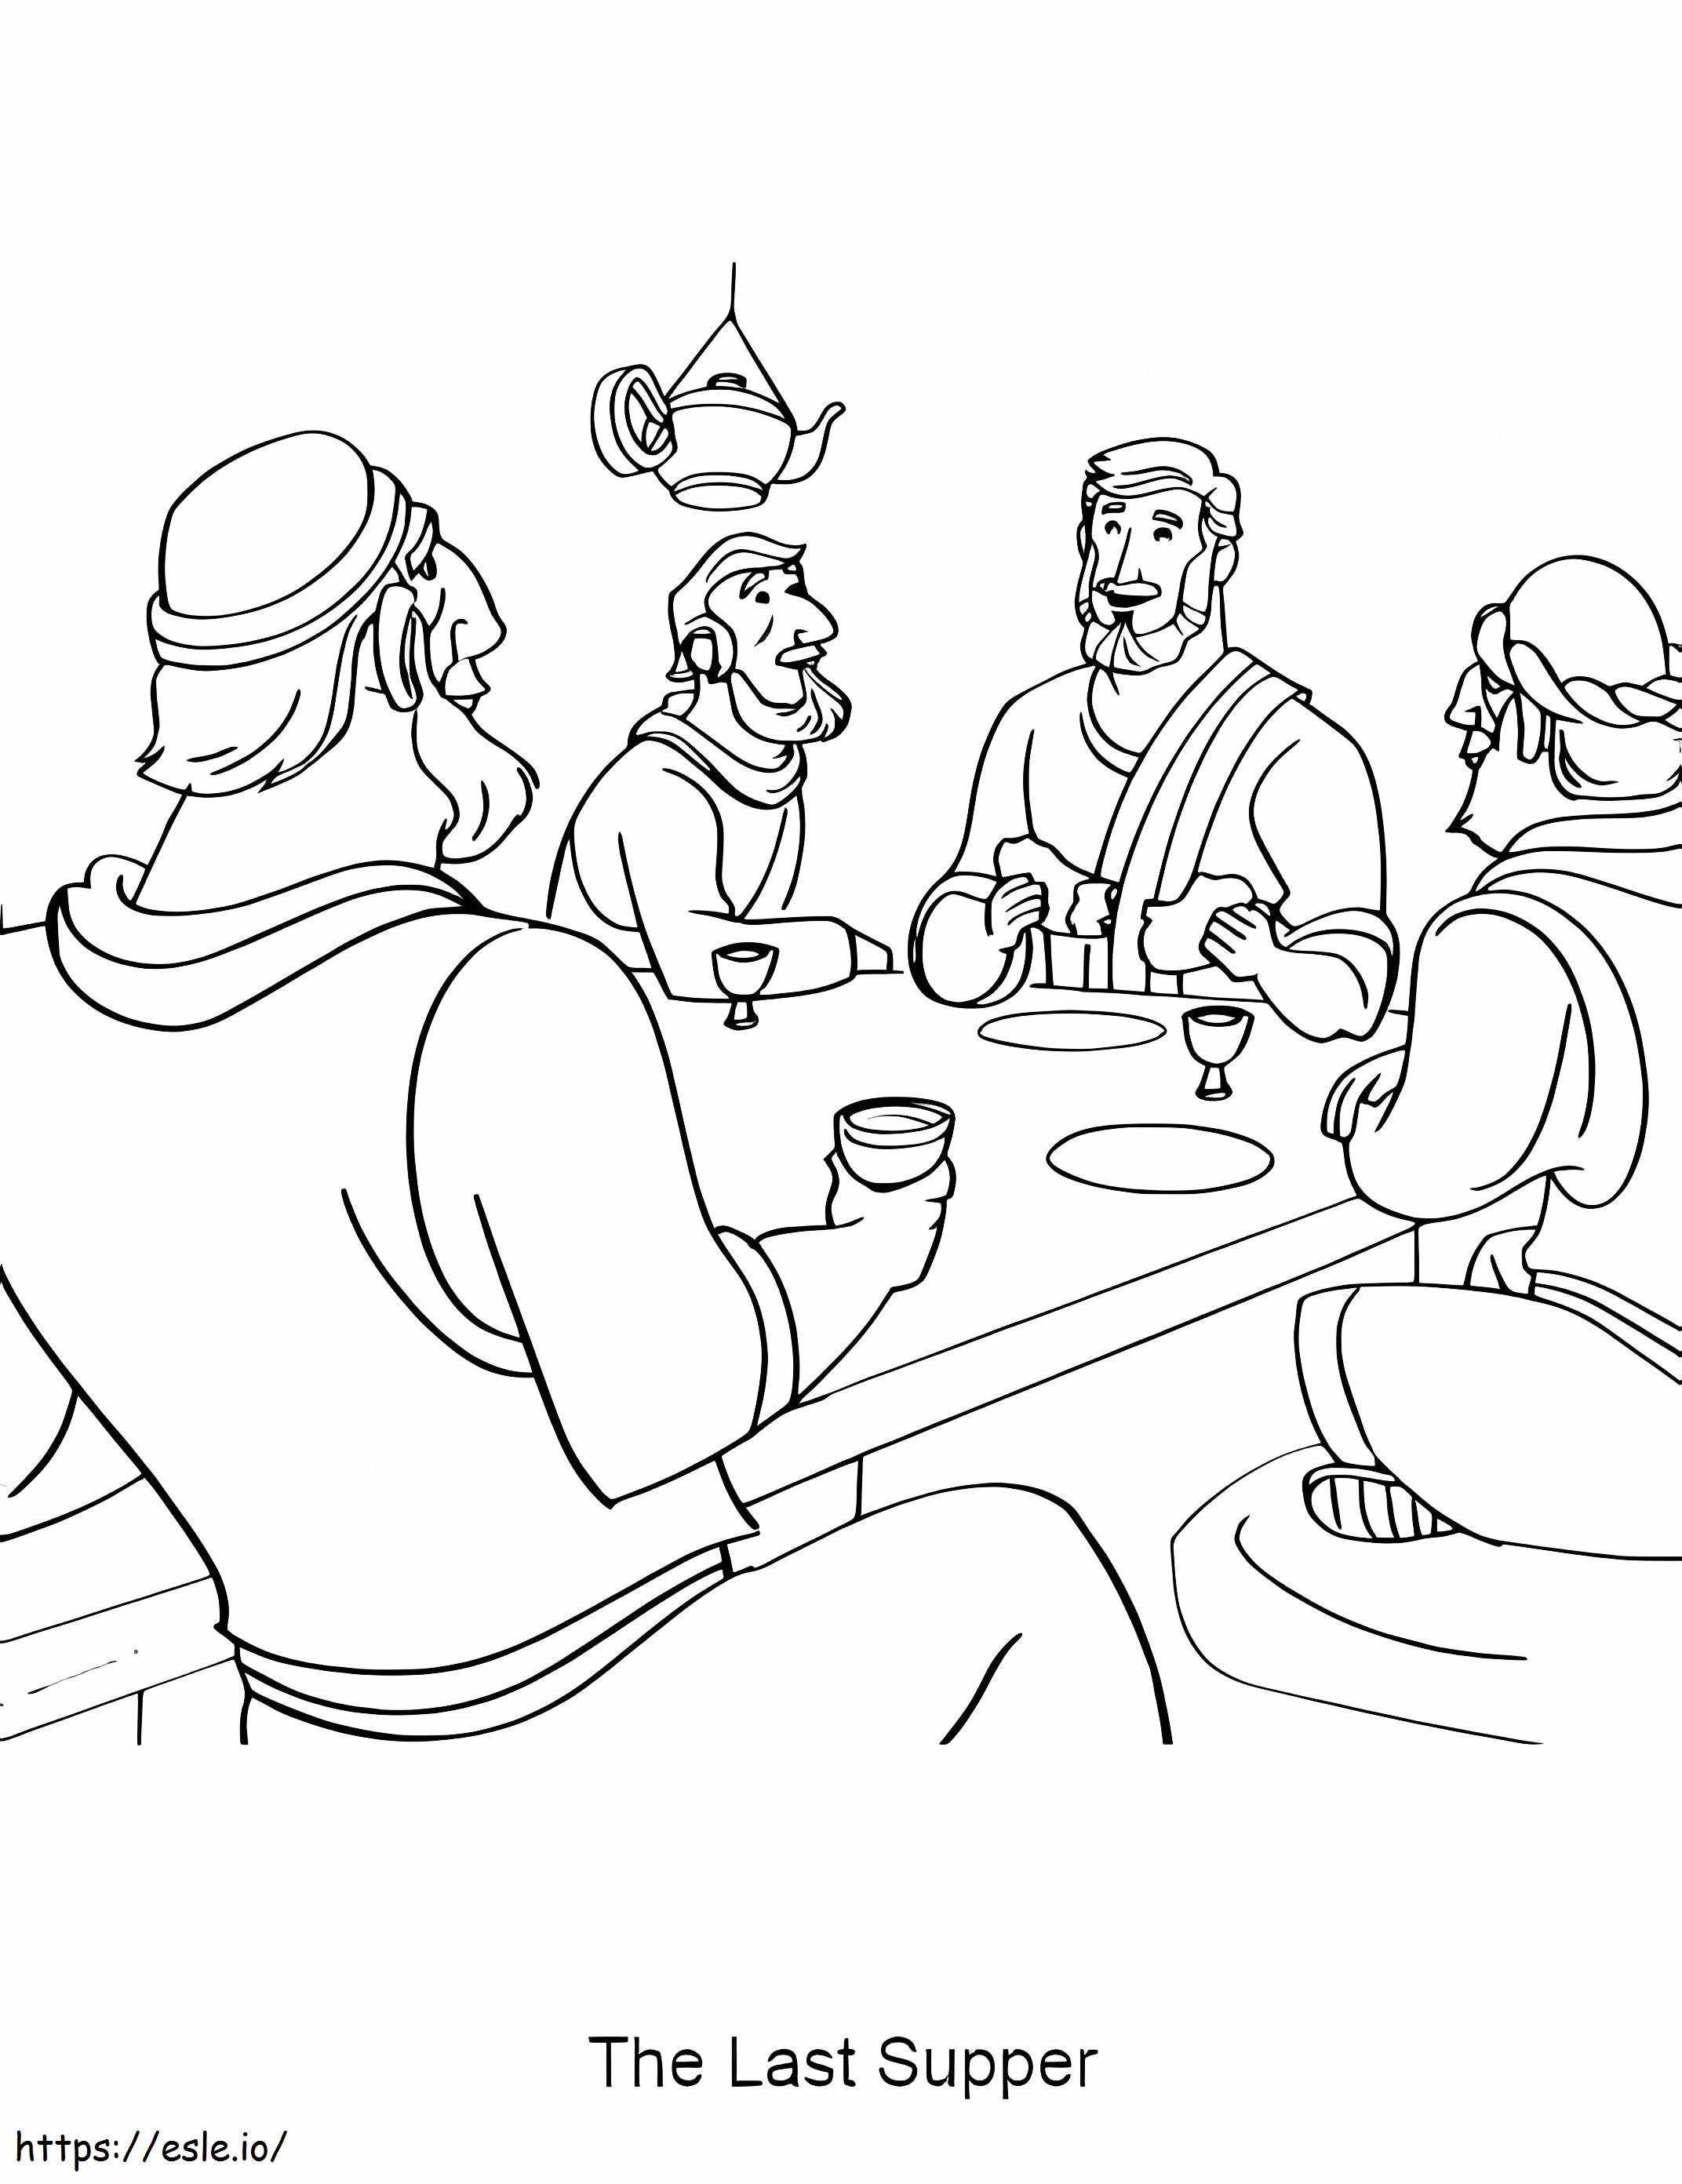 The Last Supper 9 coloring page